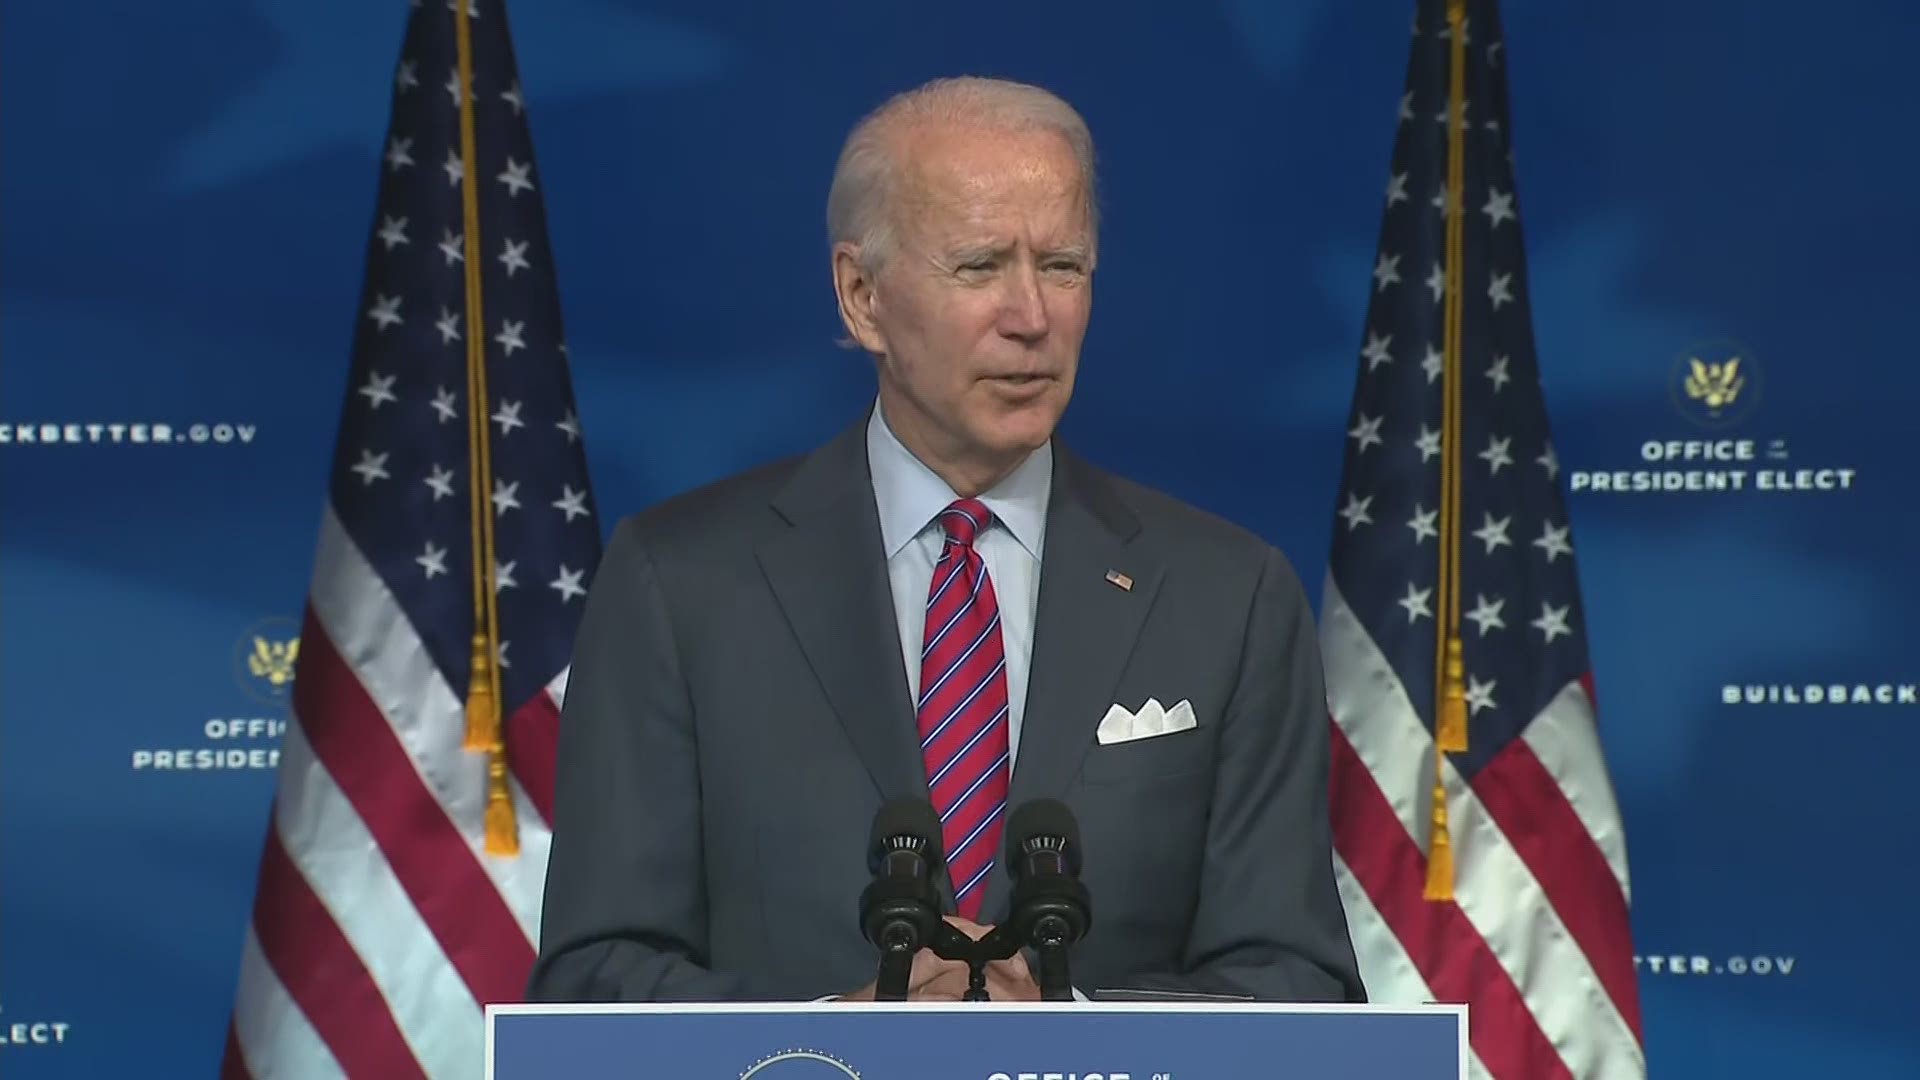 President-elect Biden said Friday that COVID-19 relief talks in Congress are 'just a down payment' and more aid will come when he takes office.